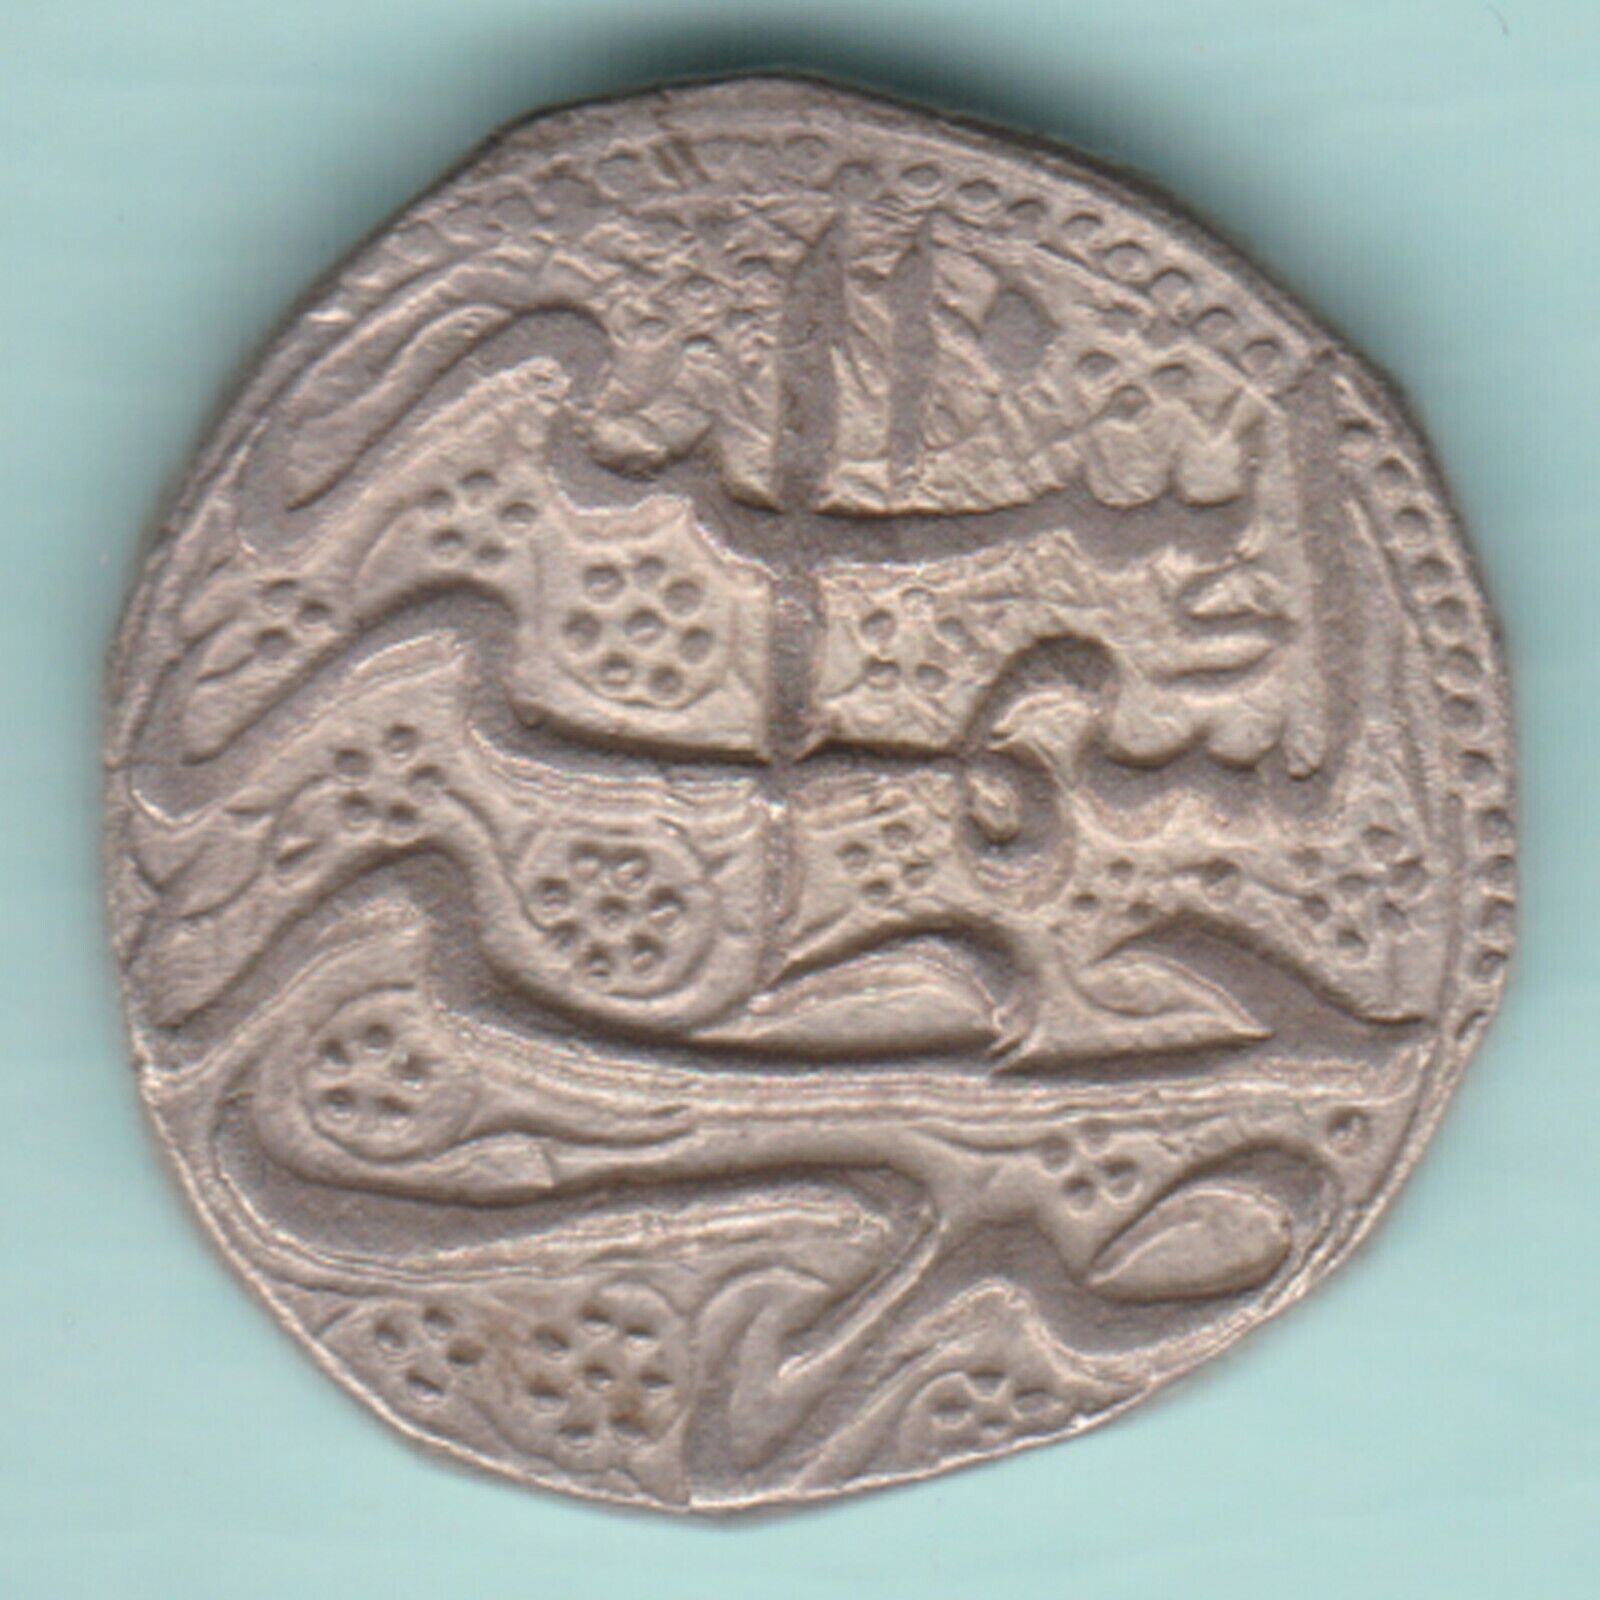 Phoenix Mall AFGHANISTAN SILVER Max 84% OFF RUPEE RARE COIN